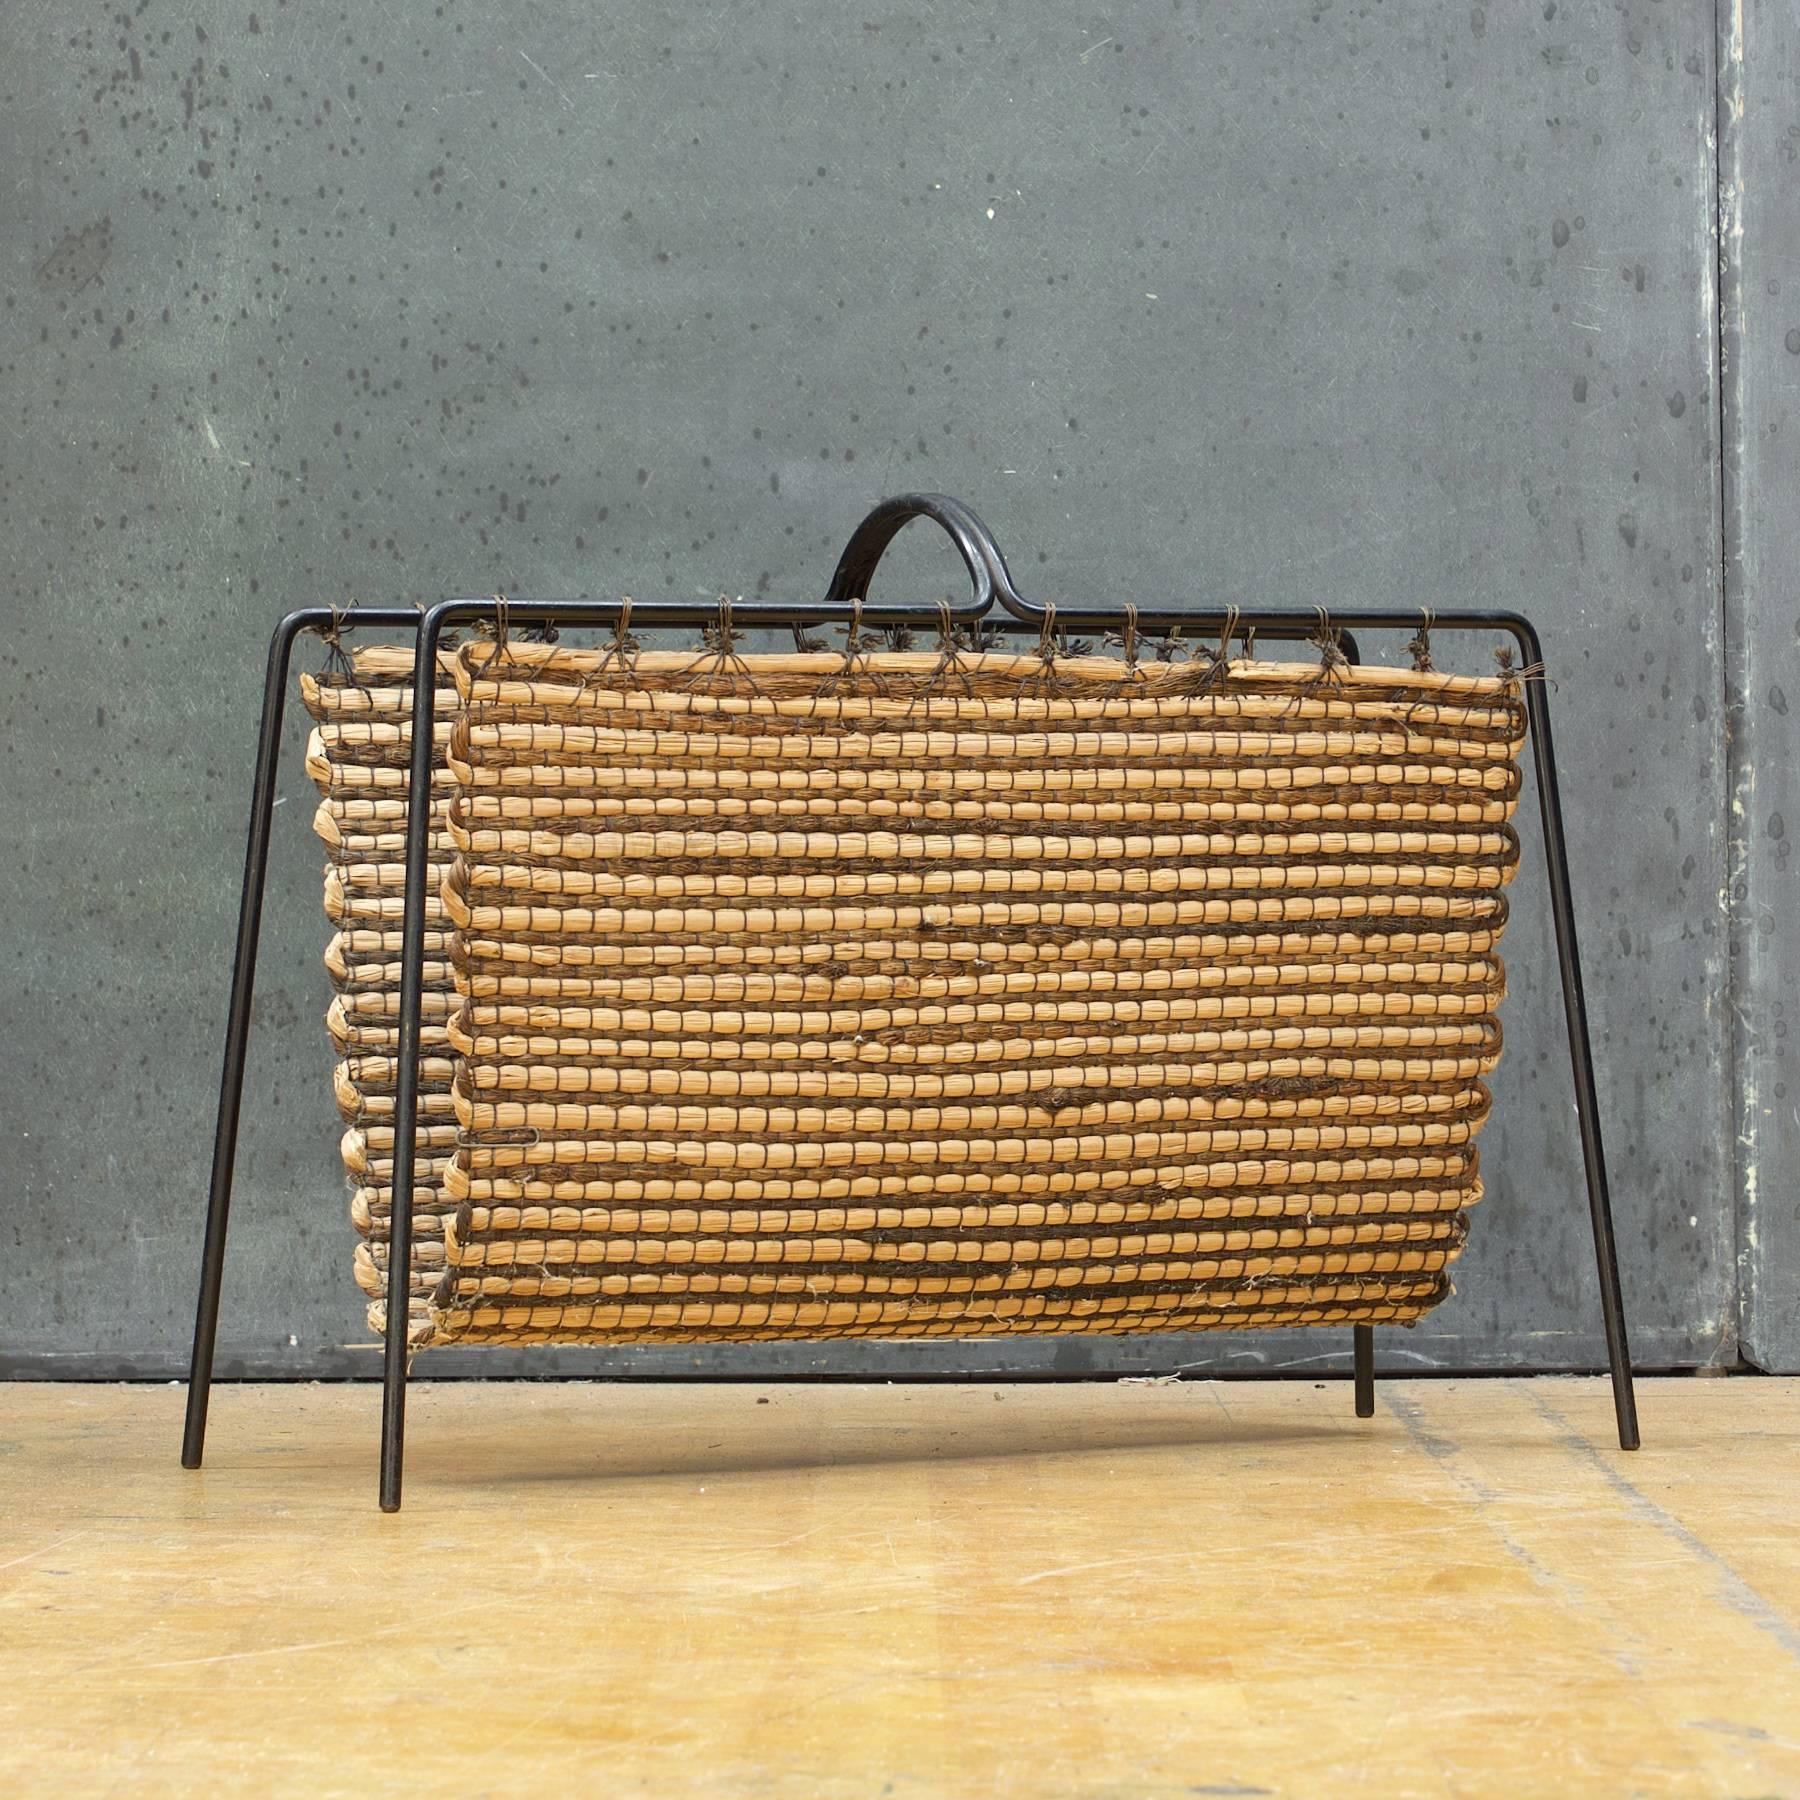 Museum quality Laverne originals magazine rack with original handwoven fiber sling design/made by Geraldine Funk. 

Same leg design applied here as the dowel framed bench, but with the two end loops of the bench swiveled 180 degrees and welded